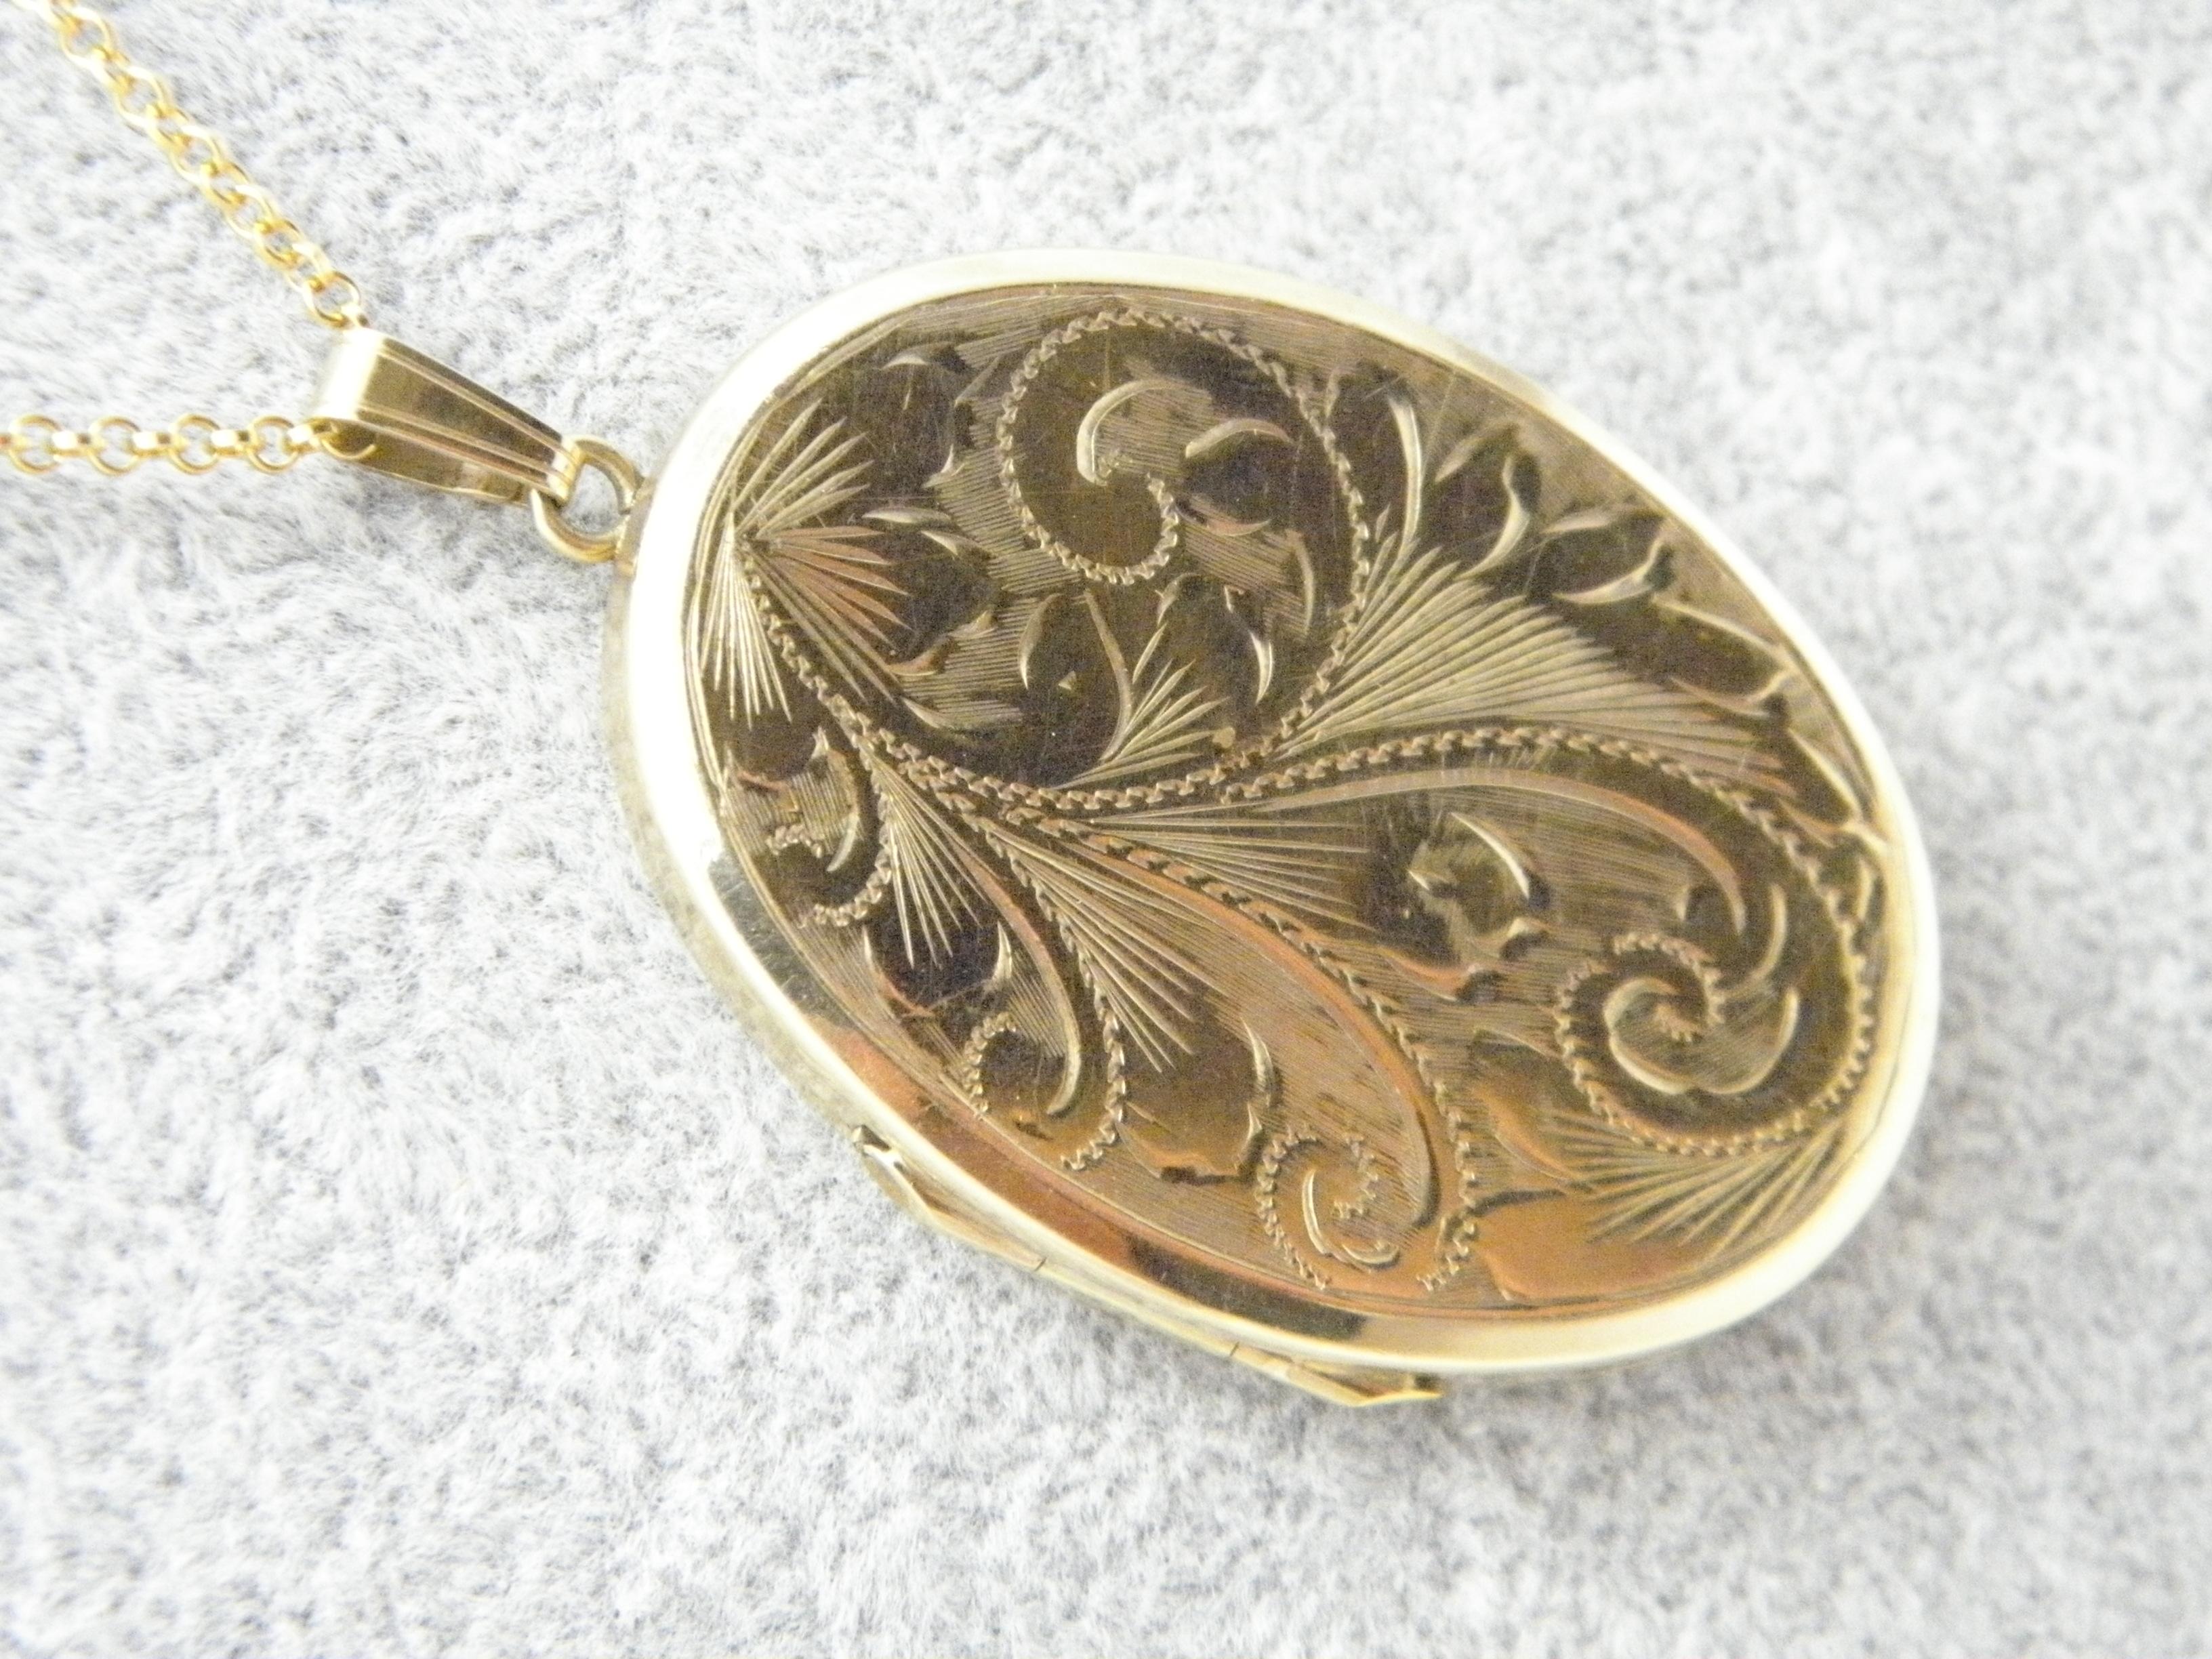 Vintage 9ct Gold Enormous Floral Locket Pendant Necklace Belcher Chain 20 Inch In Excellent Condition For Sale In Camelford, GB